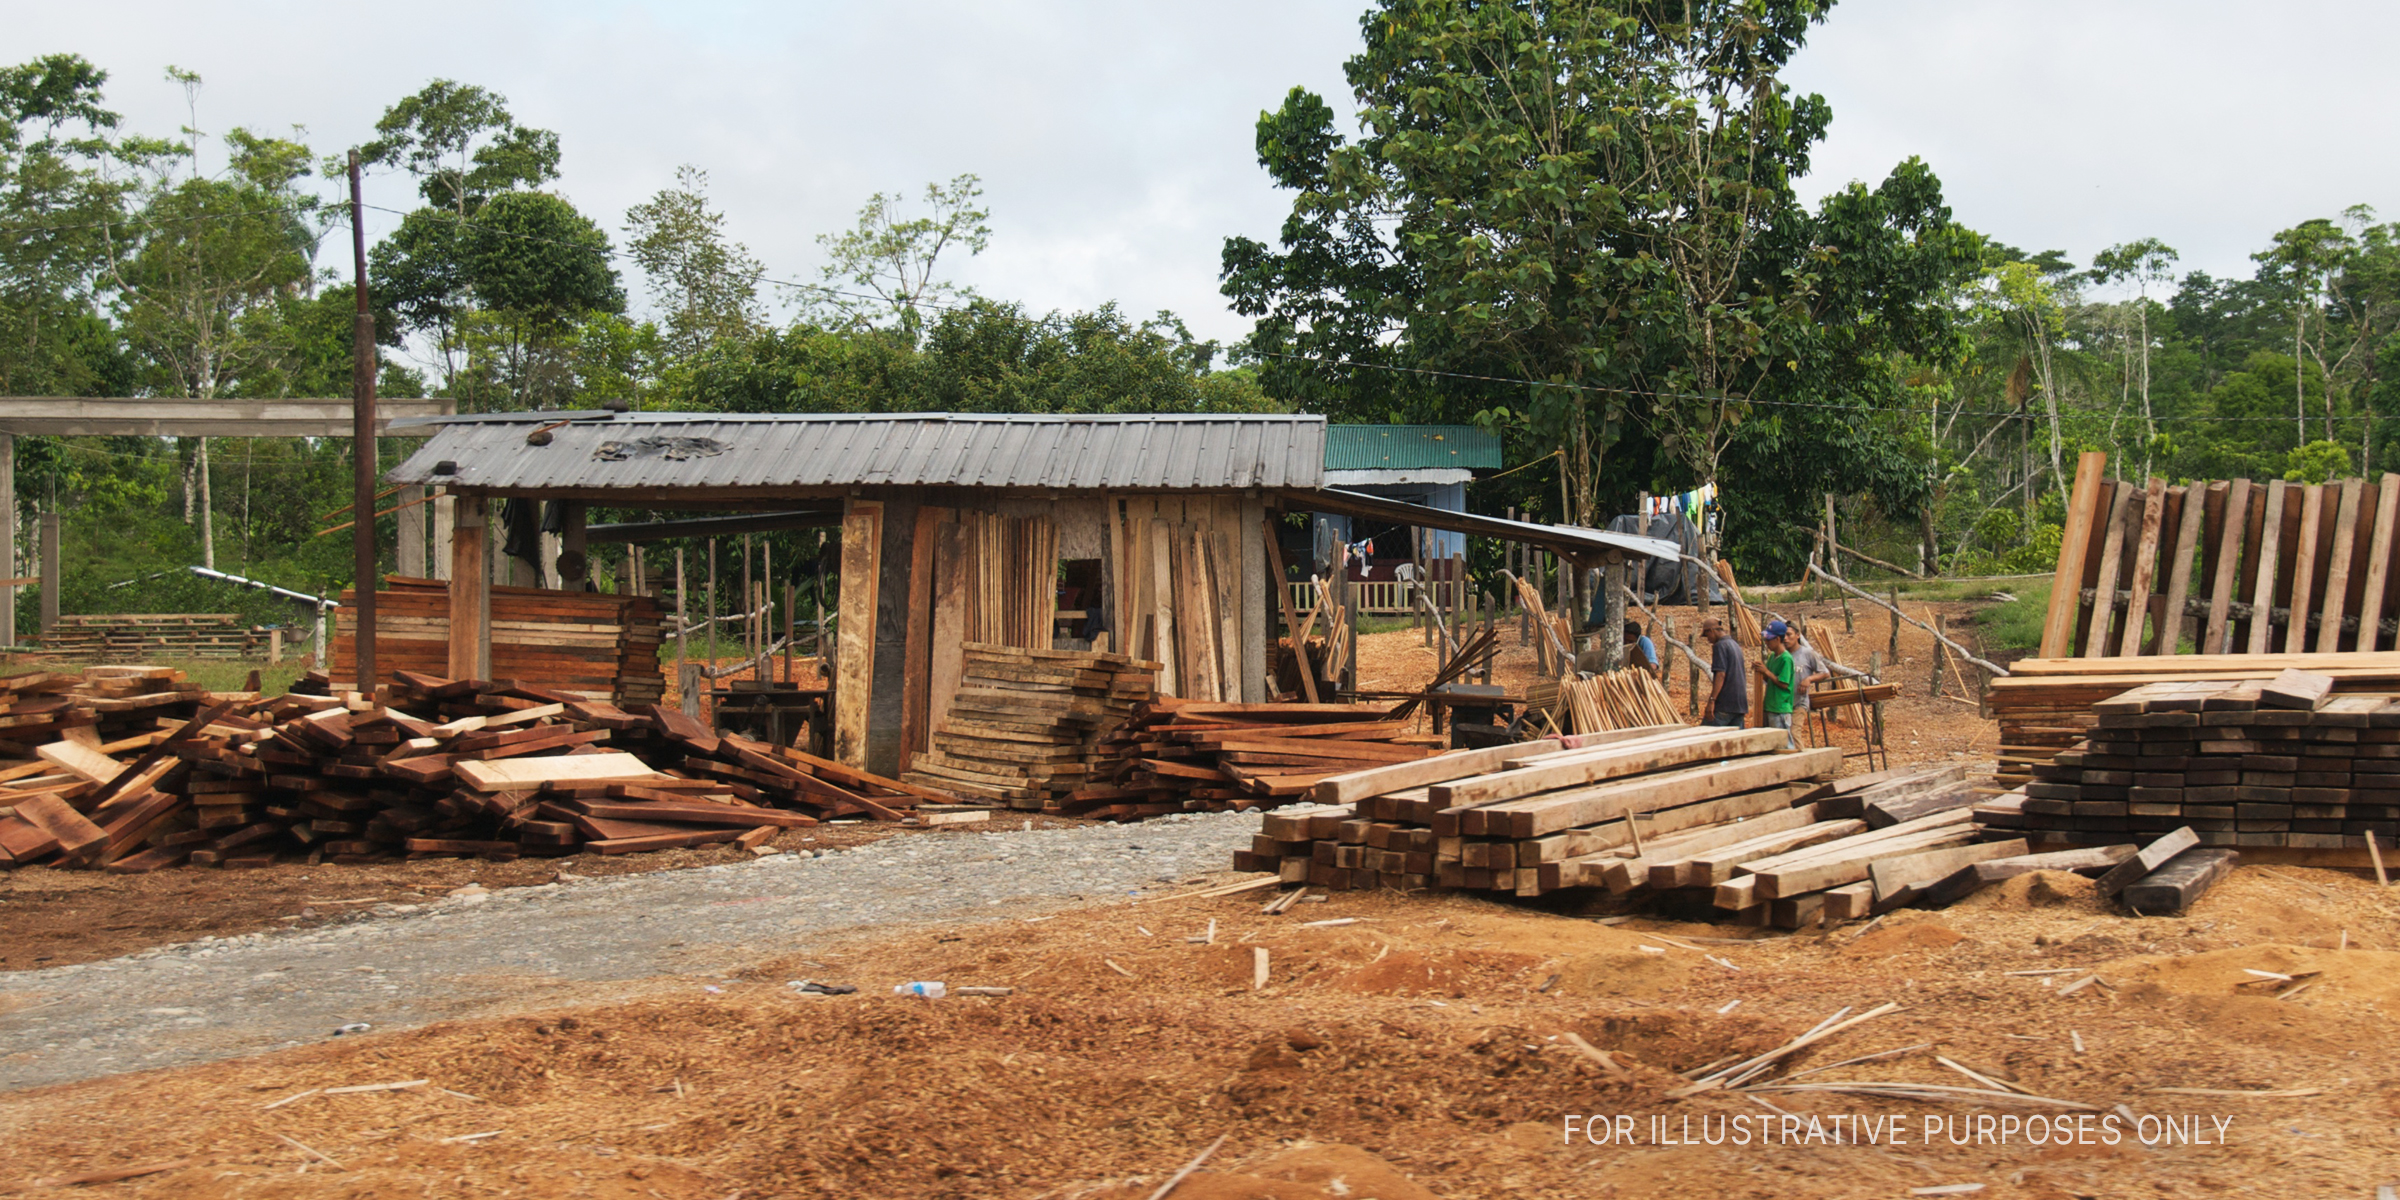 A sawmill | Source: Flickr / A.Davey (CC BY 2.0)